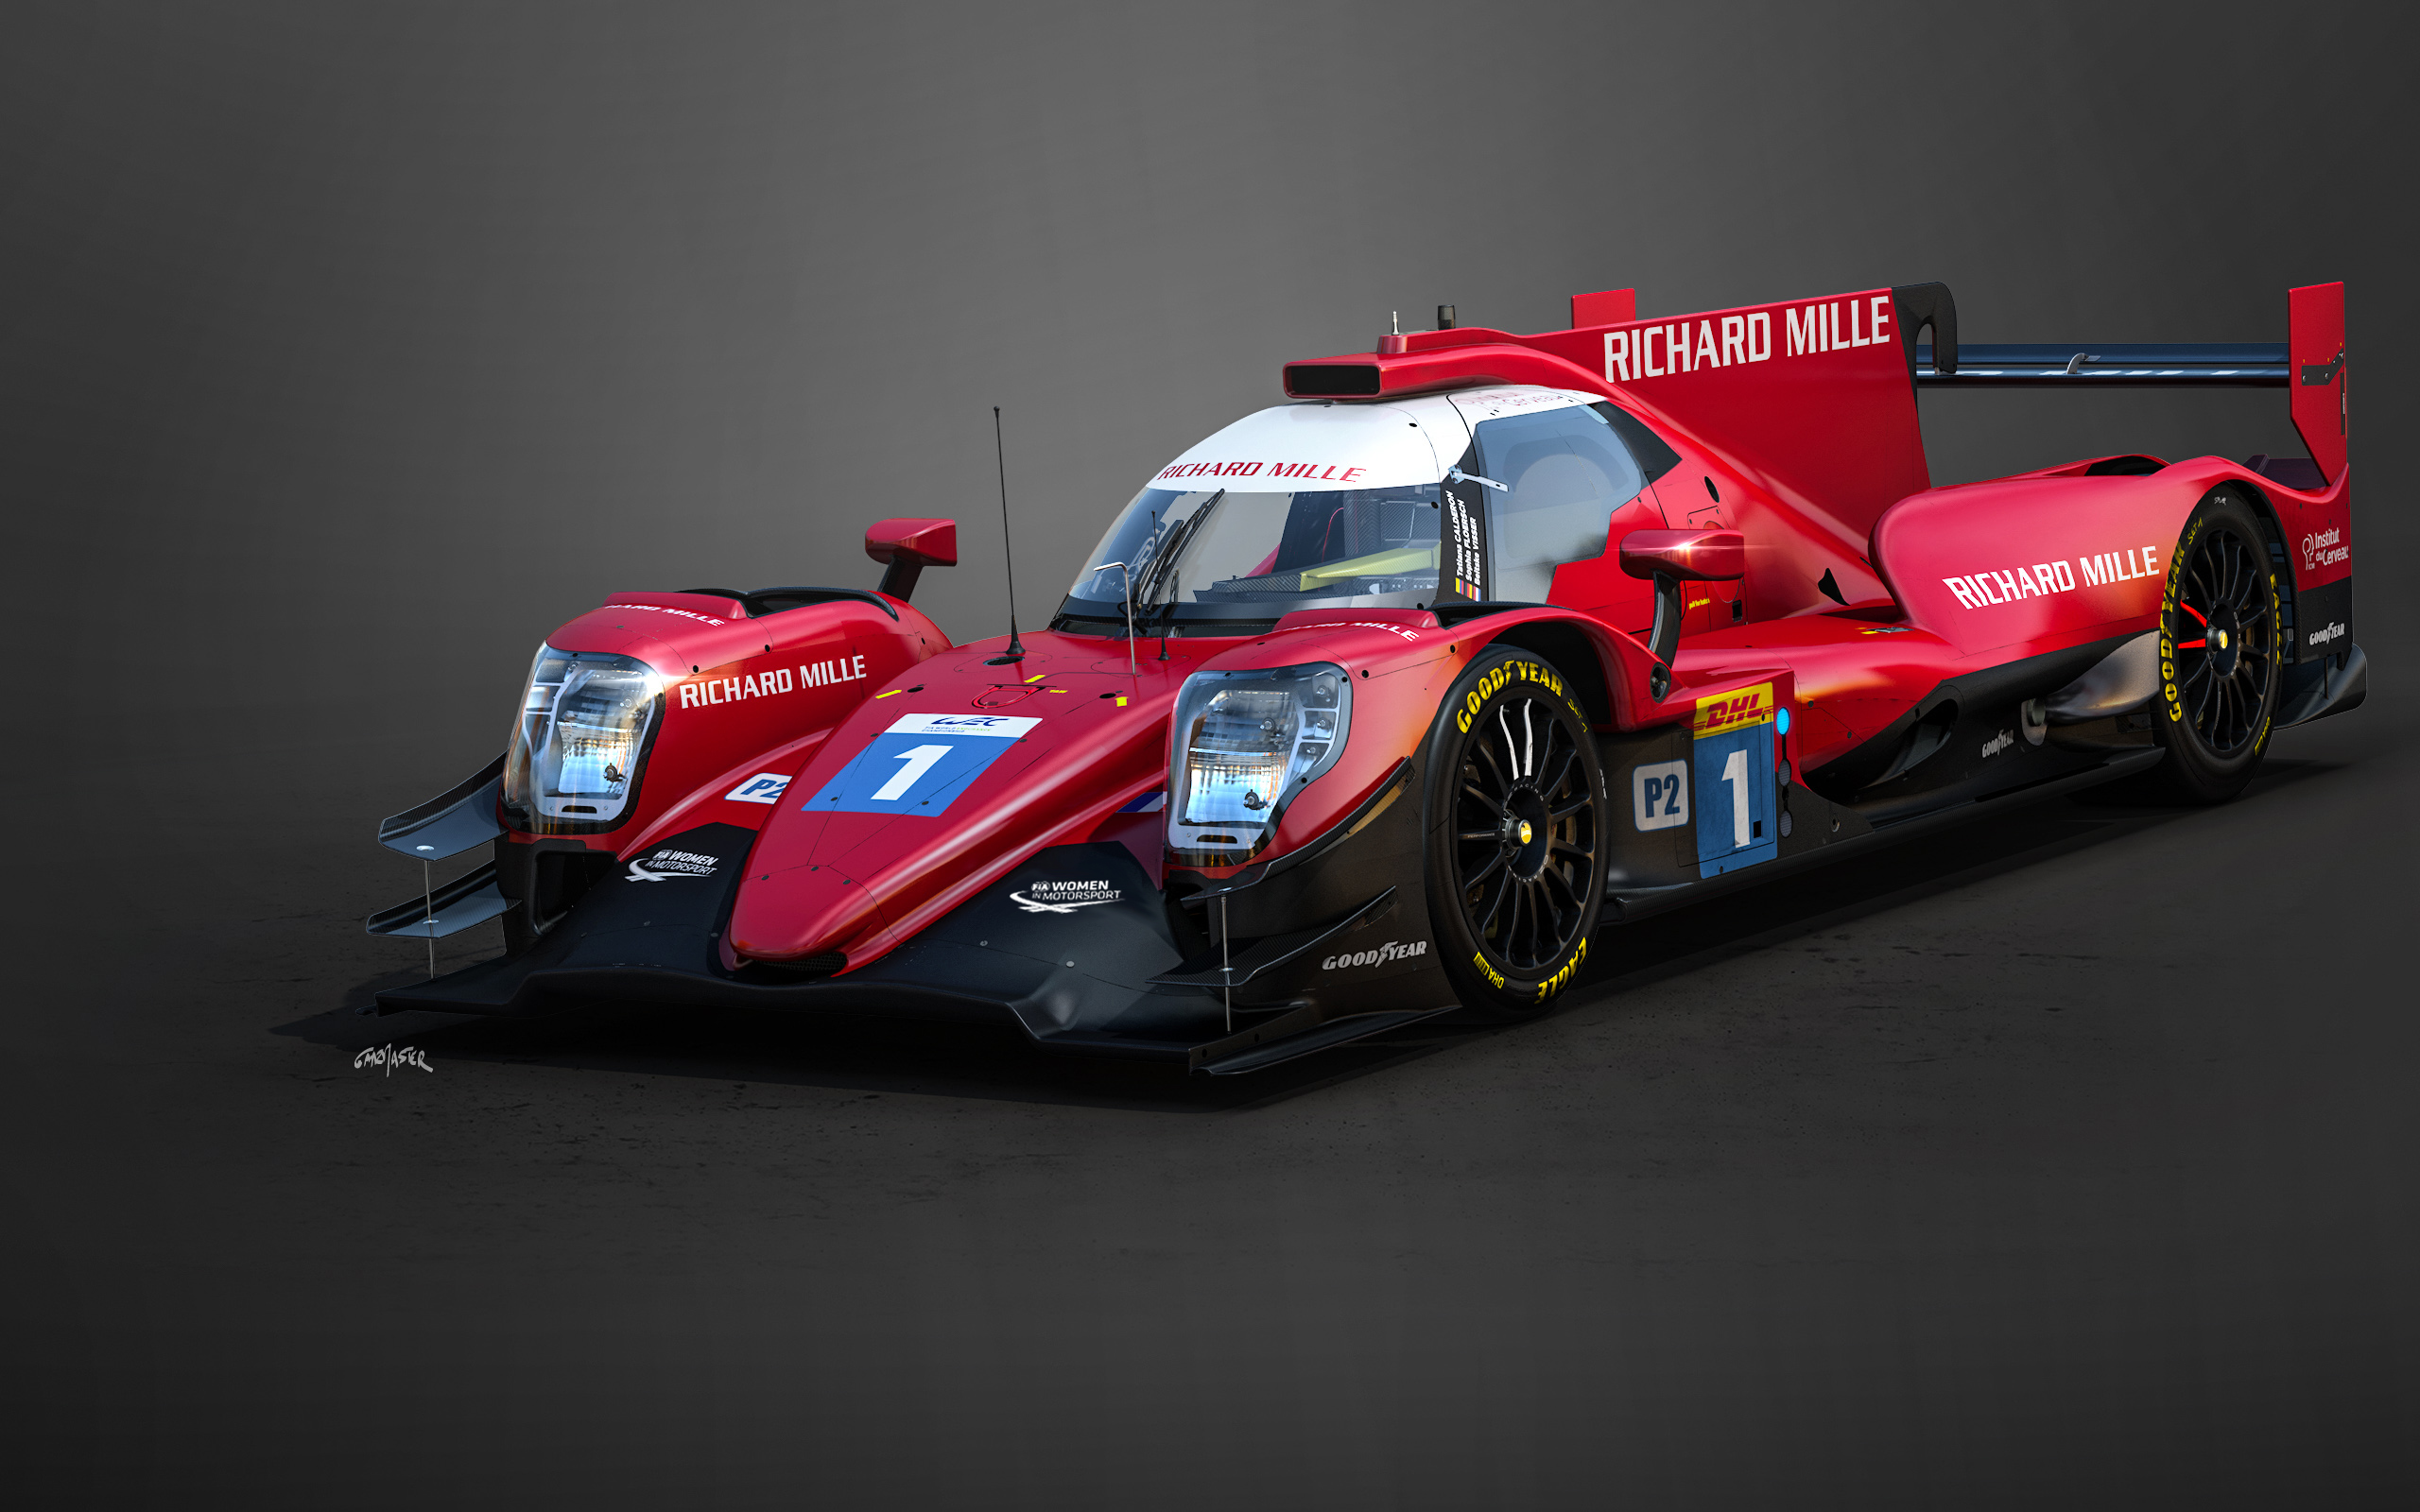 Who's new to the for 2021? Part - FIA World Endurance Champion